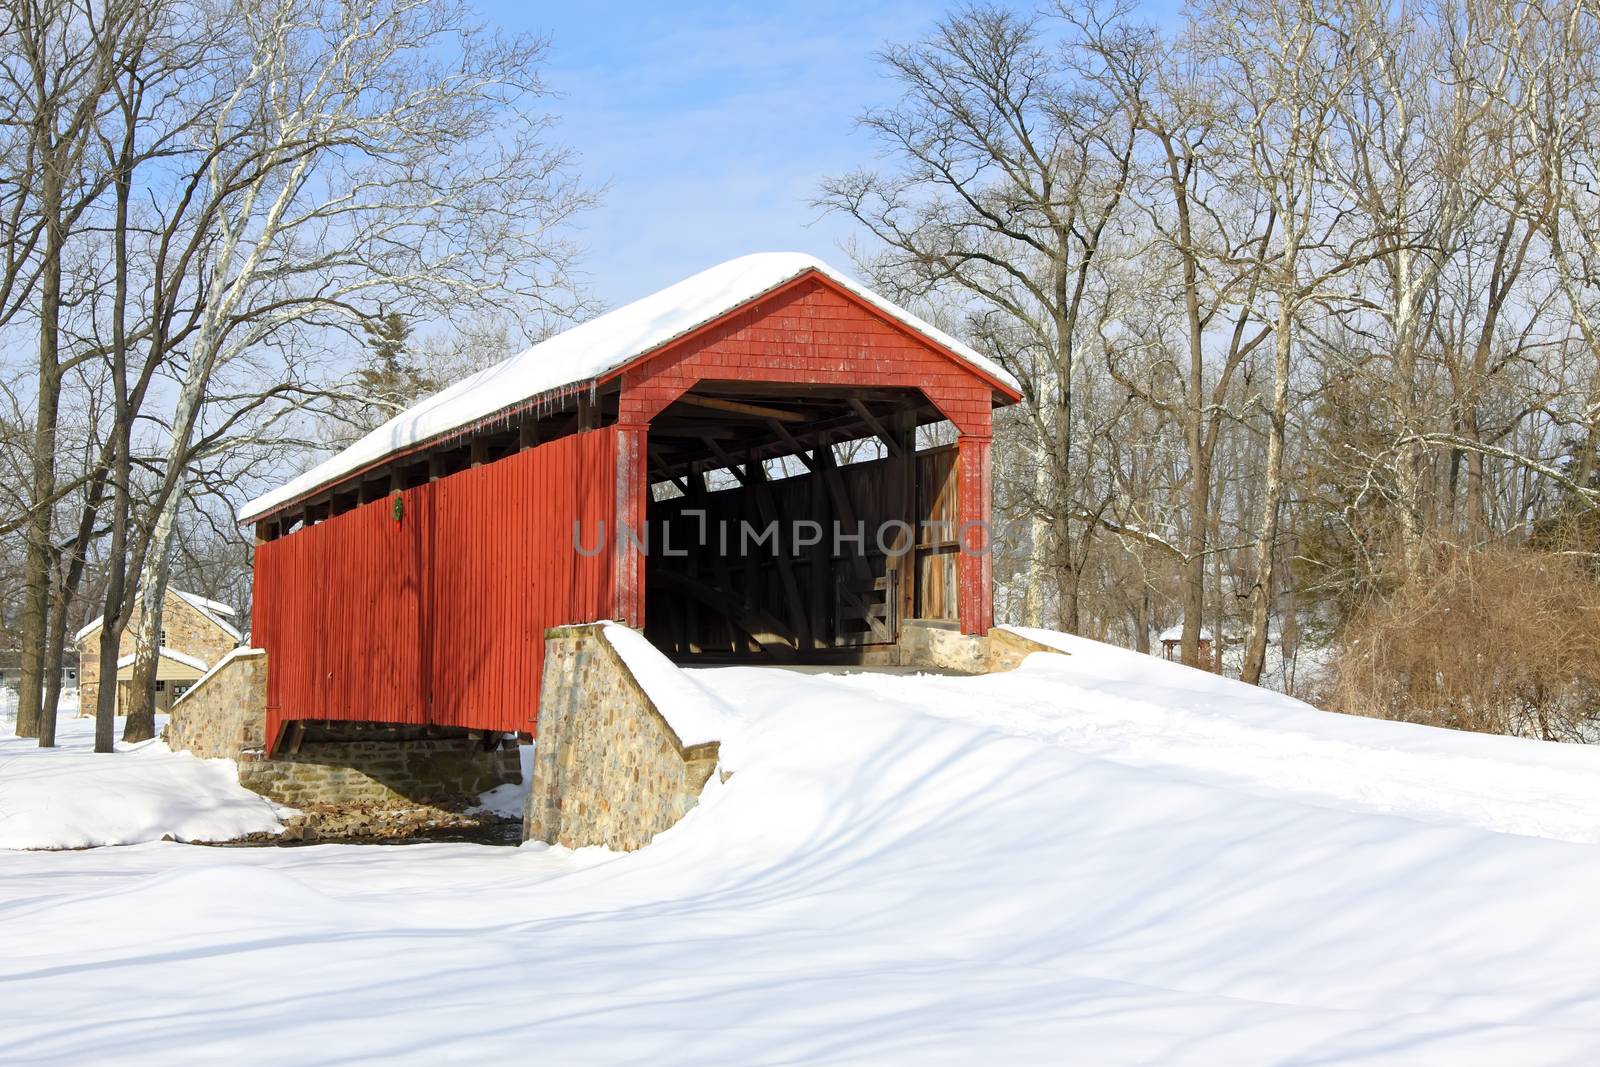 Pool Forge Covered Bridge with snow in Lancaster County, Pennsylvania, USA.